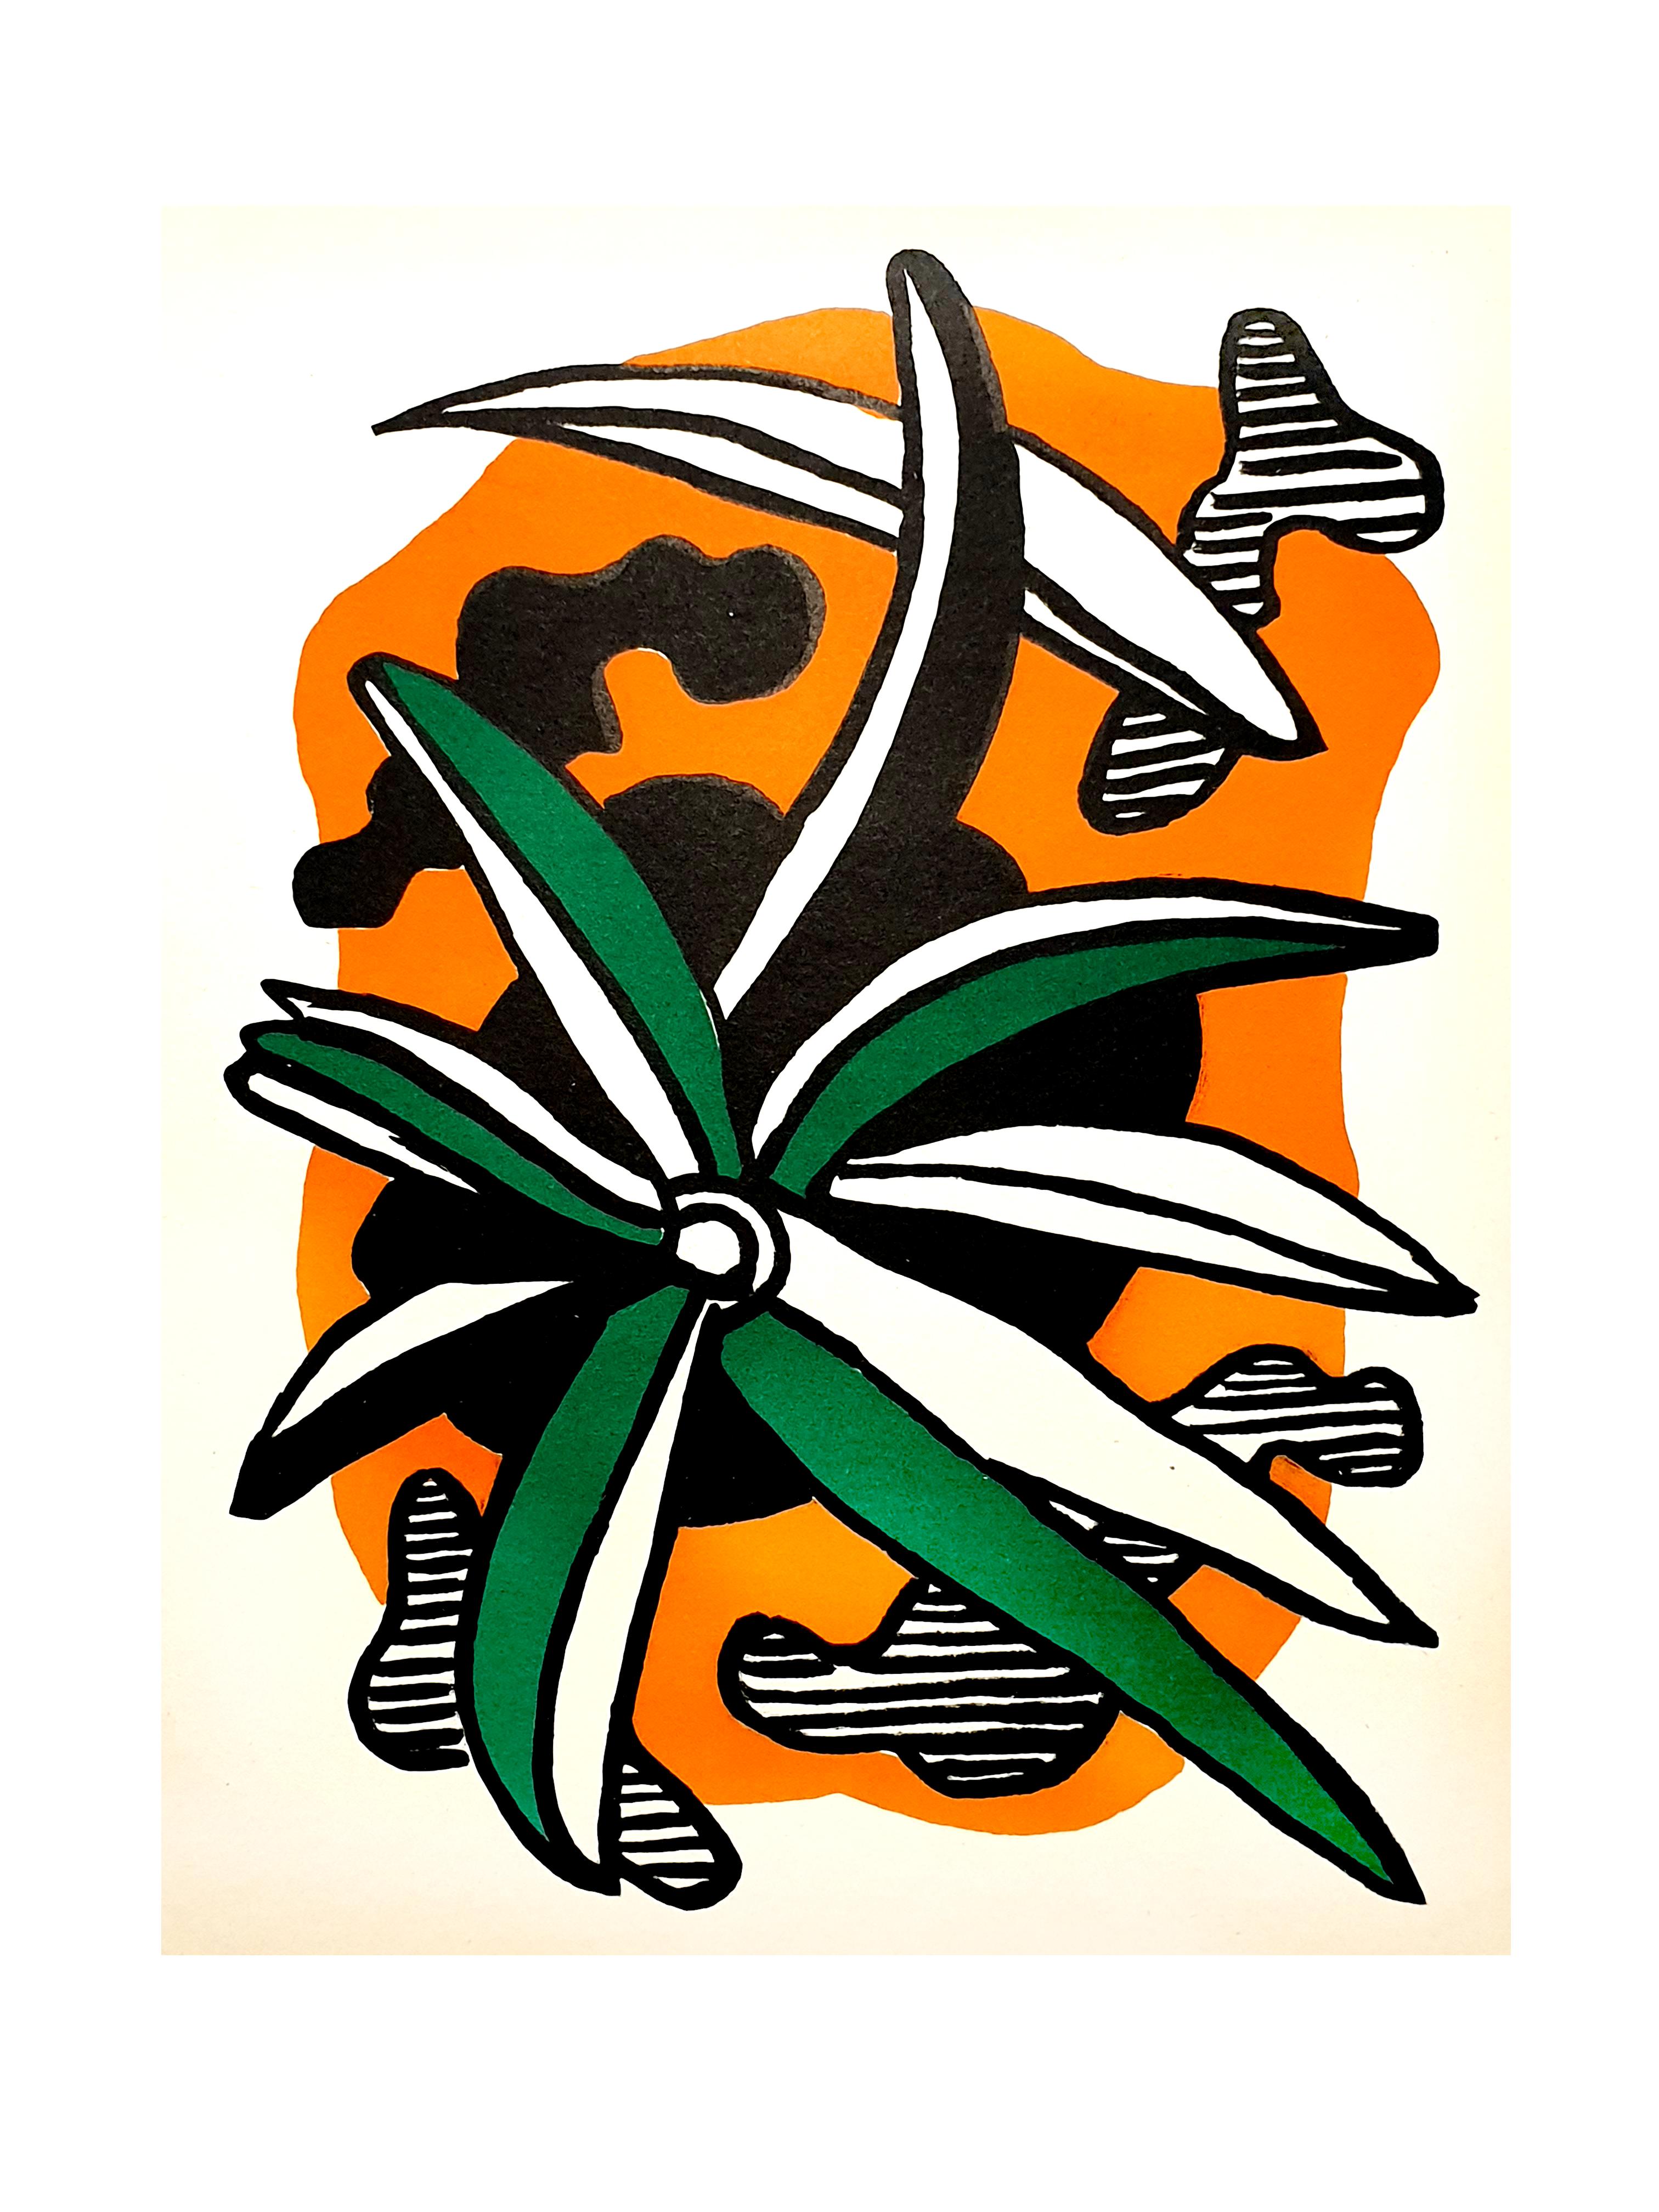 Fernand Léger - Flowers - Original Lithograph
Conditions: excellent
32 x 24 cm
1951
XXe siècle, San Lazzaro

Joseph Fernand Henri Leger was born in 1881 in Argentan, France. He apprentices with an architect from 1897–1899. Fernand Leger moves to